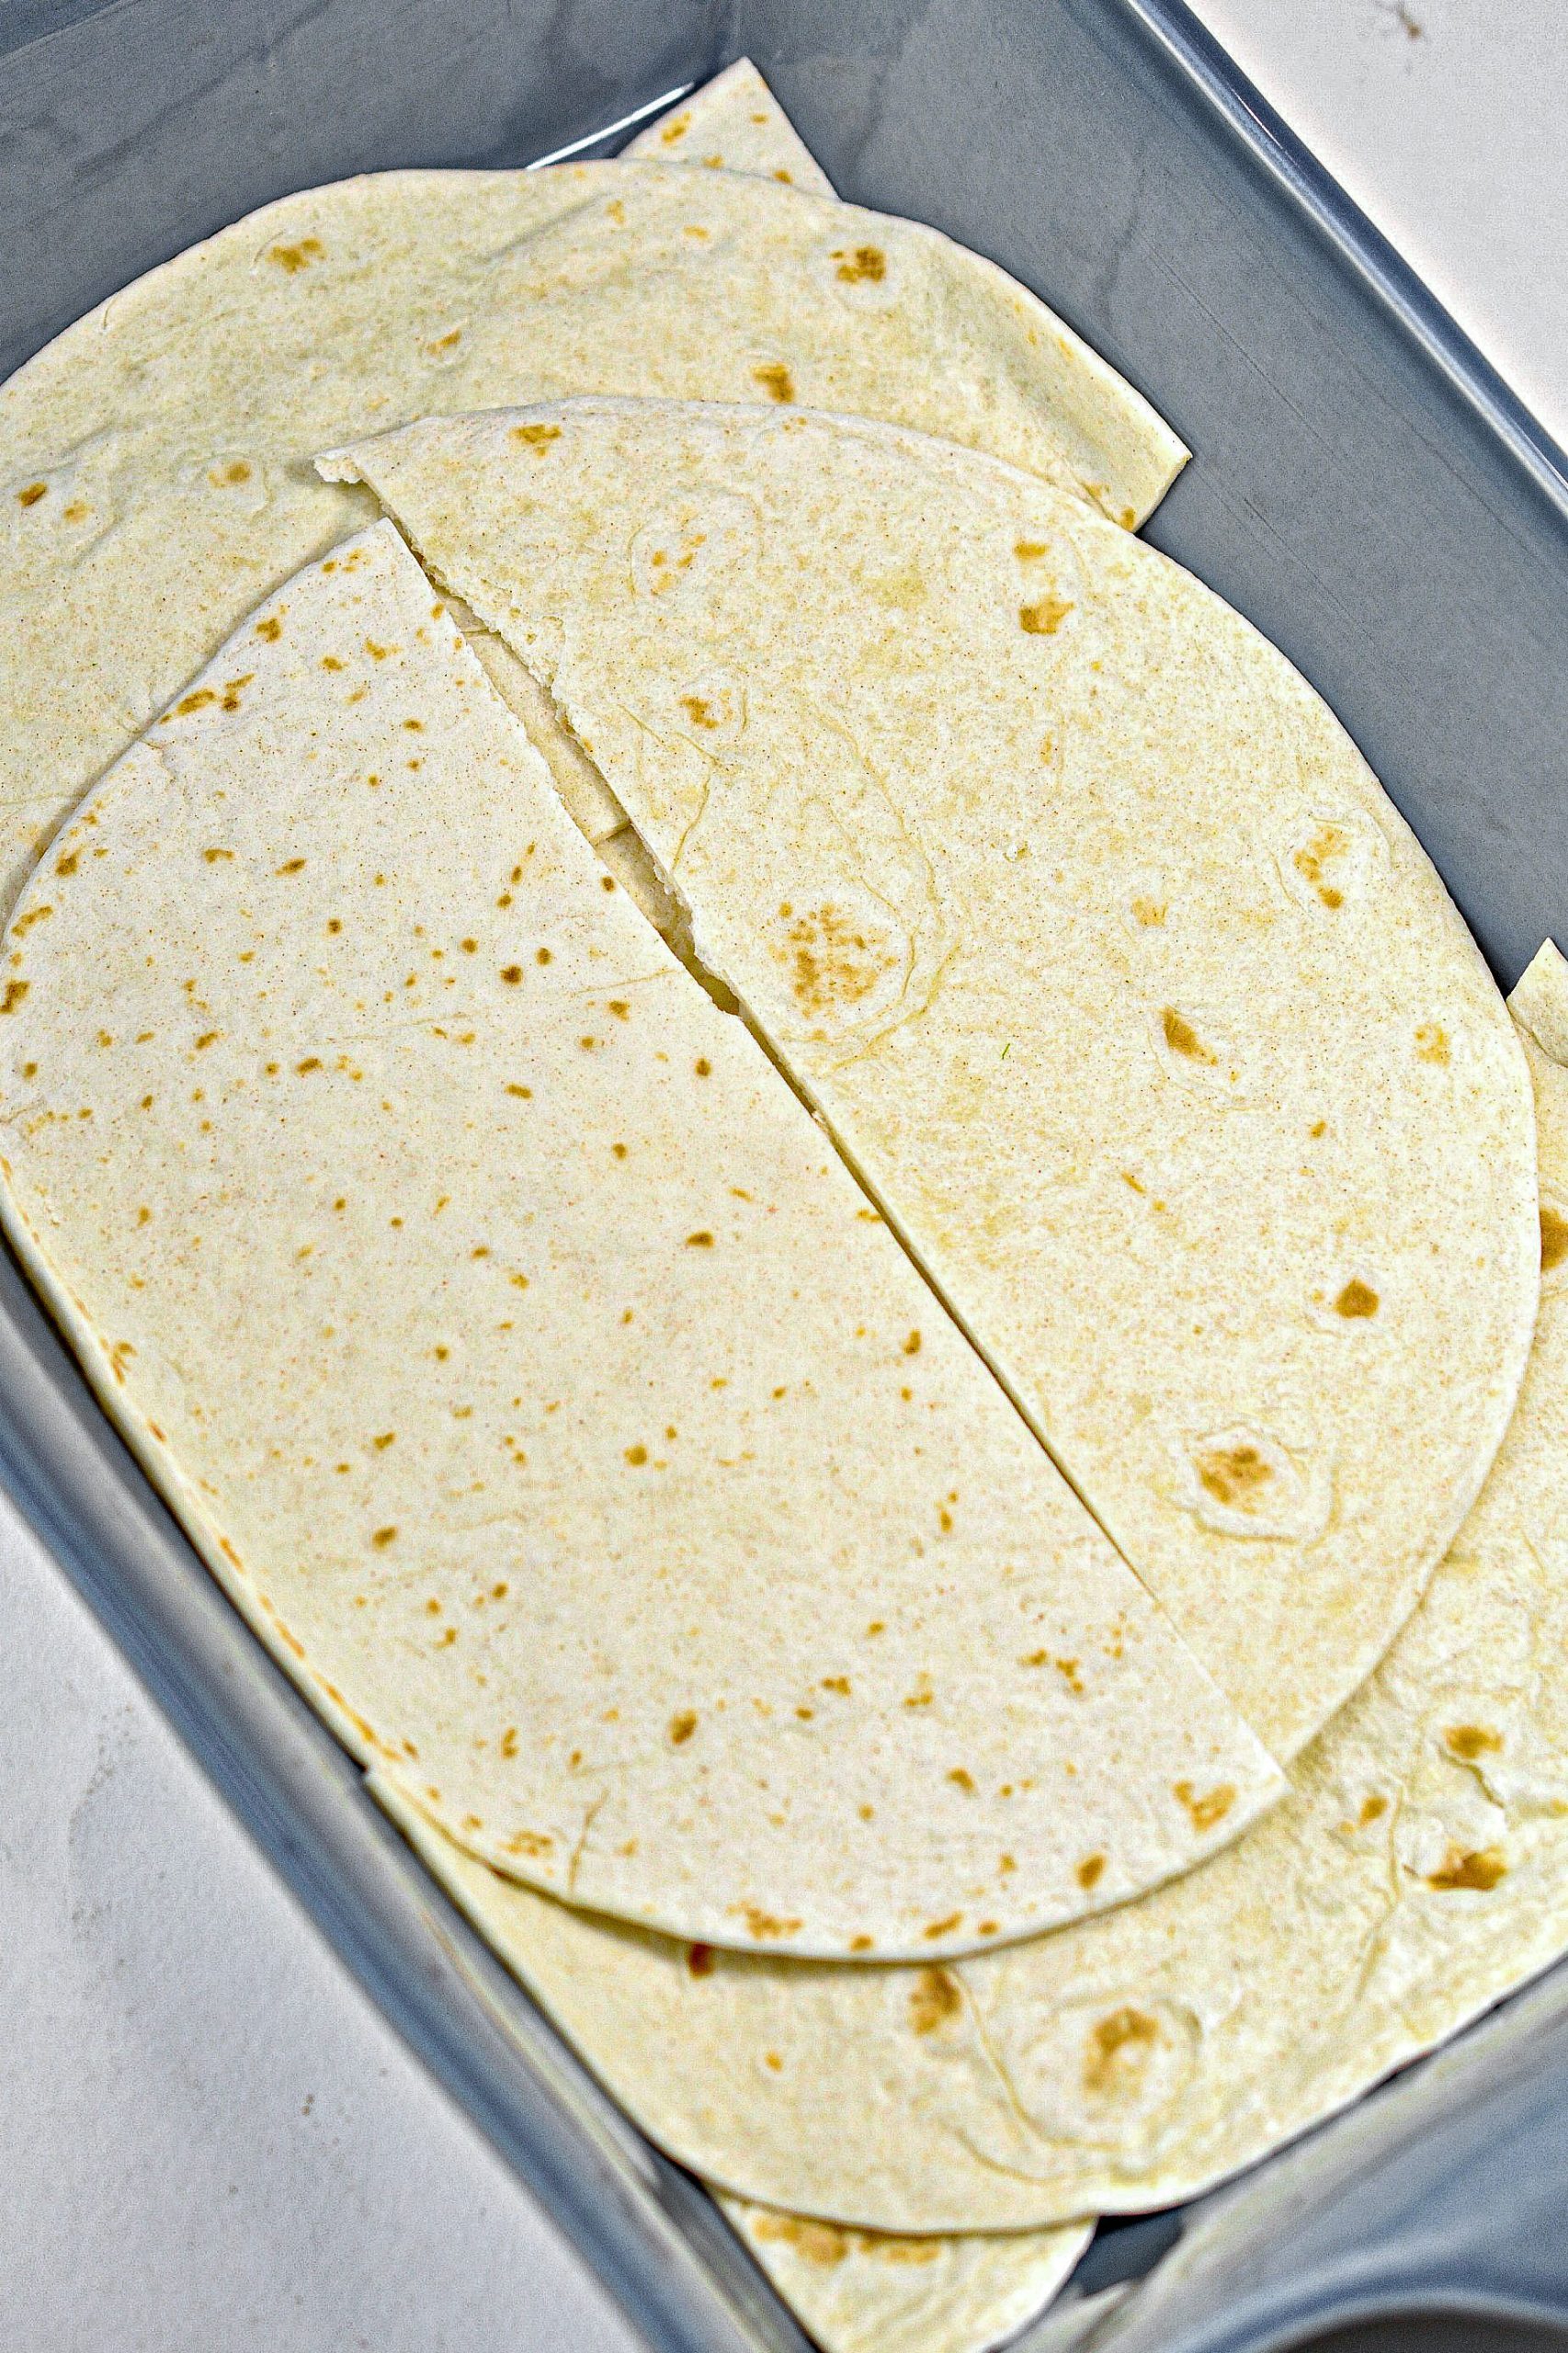 Place a layer made of 4 of the flour tortillas that have been cut in half in the bottom of a well-greased 9x13 baking dish.